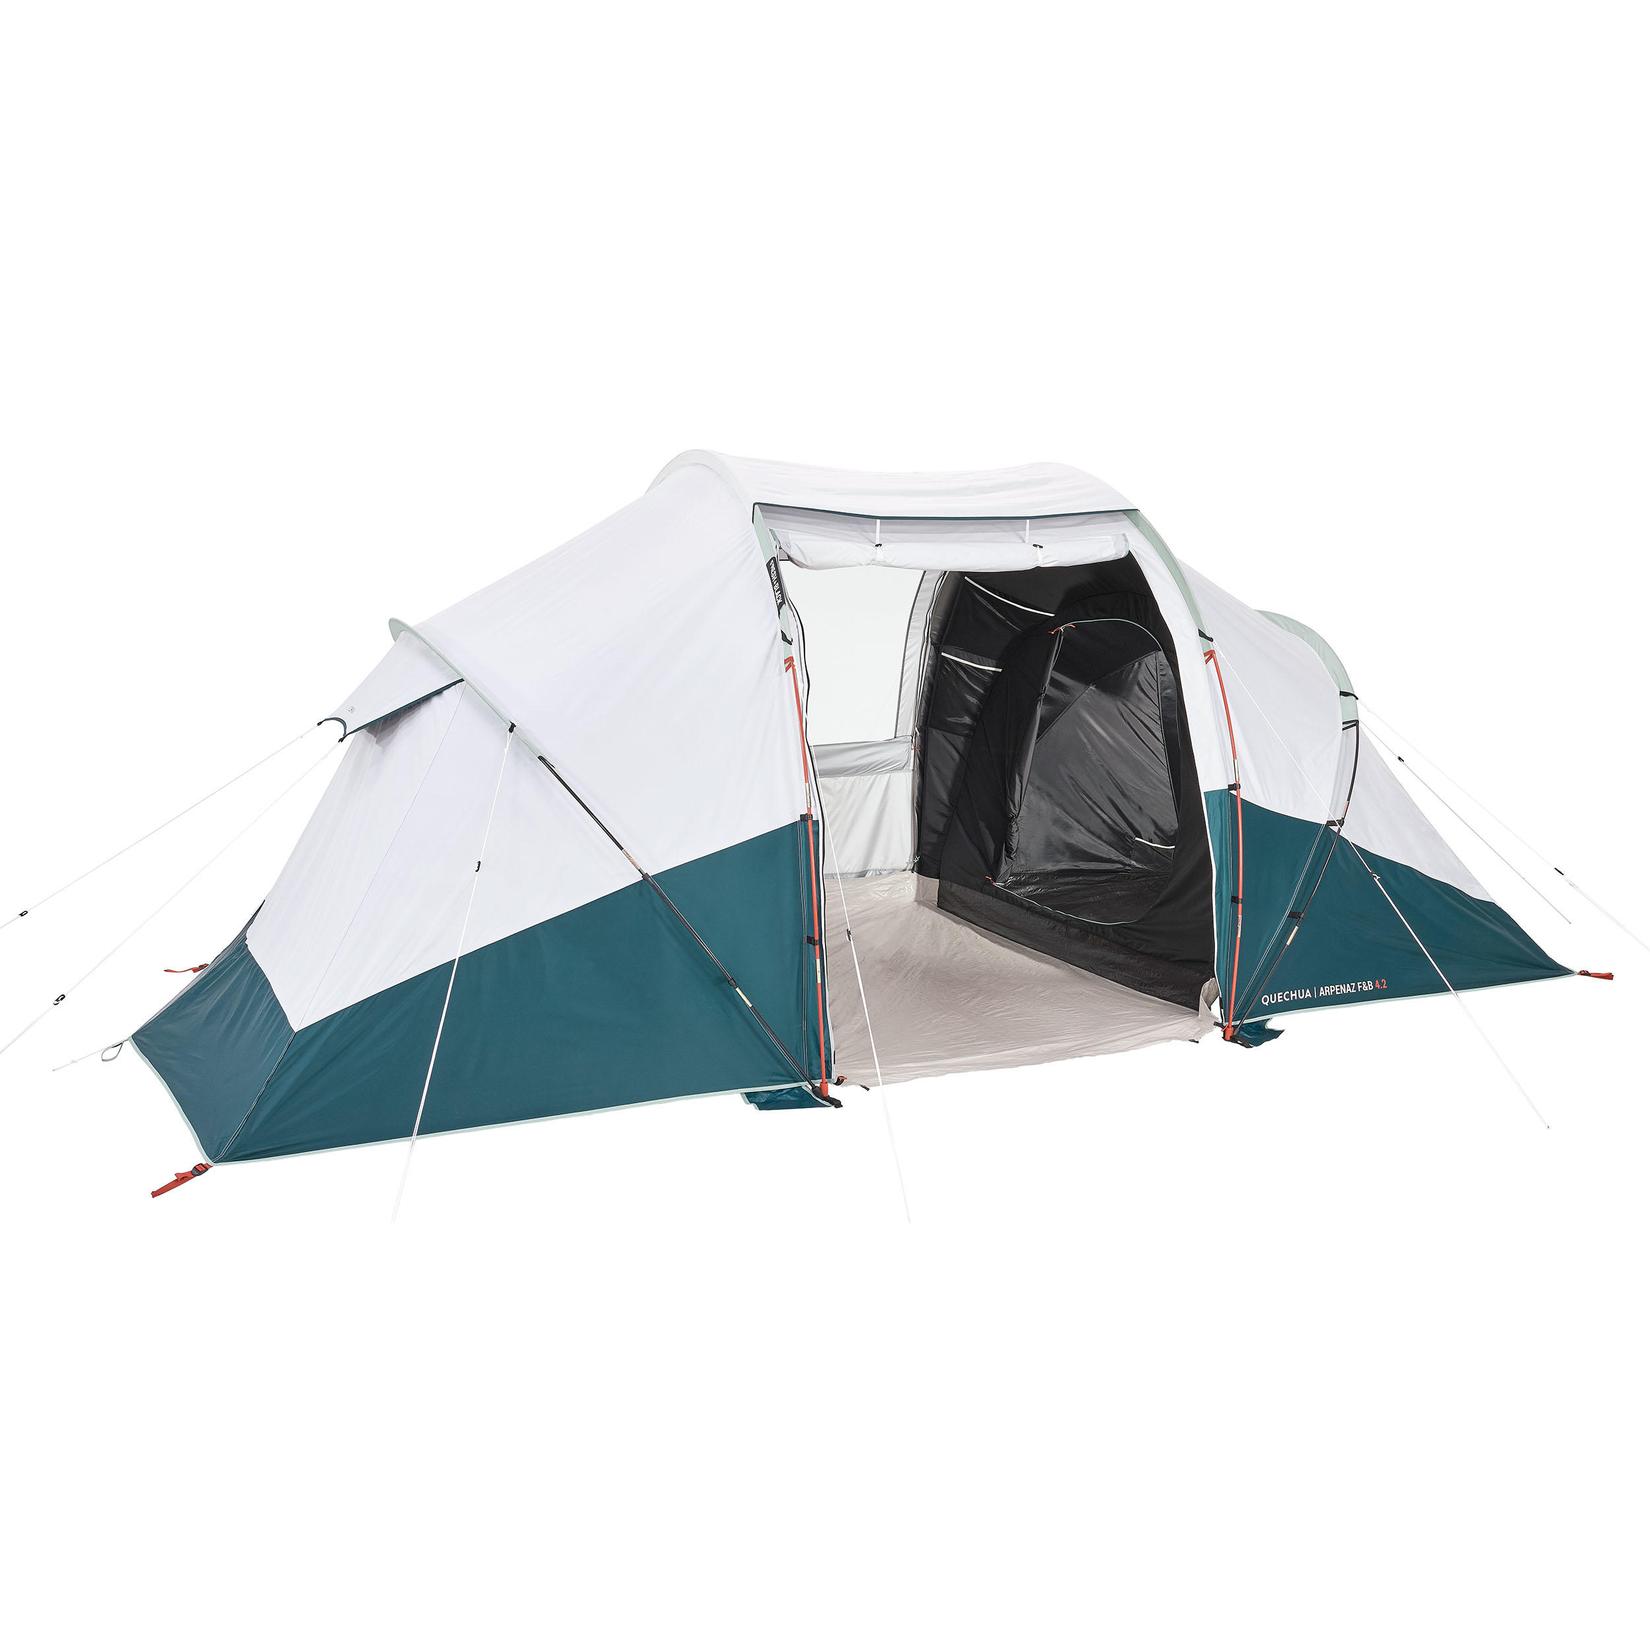 Nature Hiking 4 People 2 Bedrooms Camping Tent with Poles Quechua Arpenaz 4.2 offers at S$ 259.9 in Decathlon